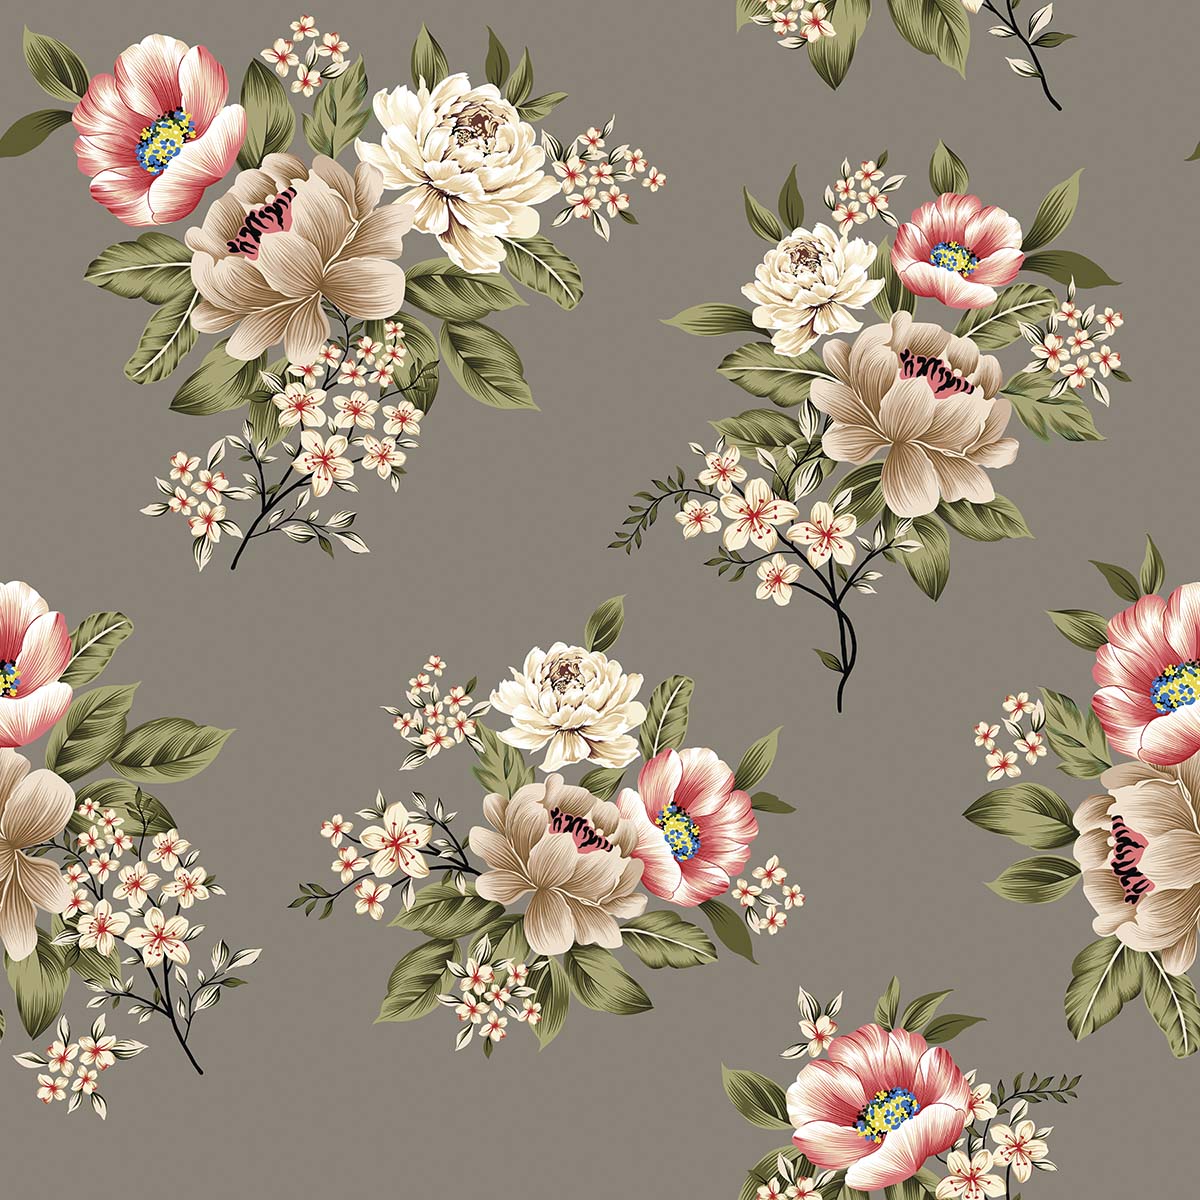 A pattern of flowers on a grey background